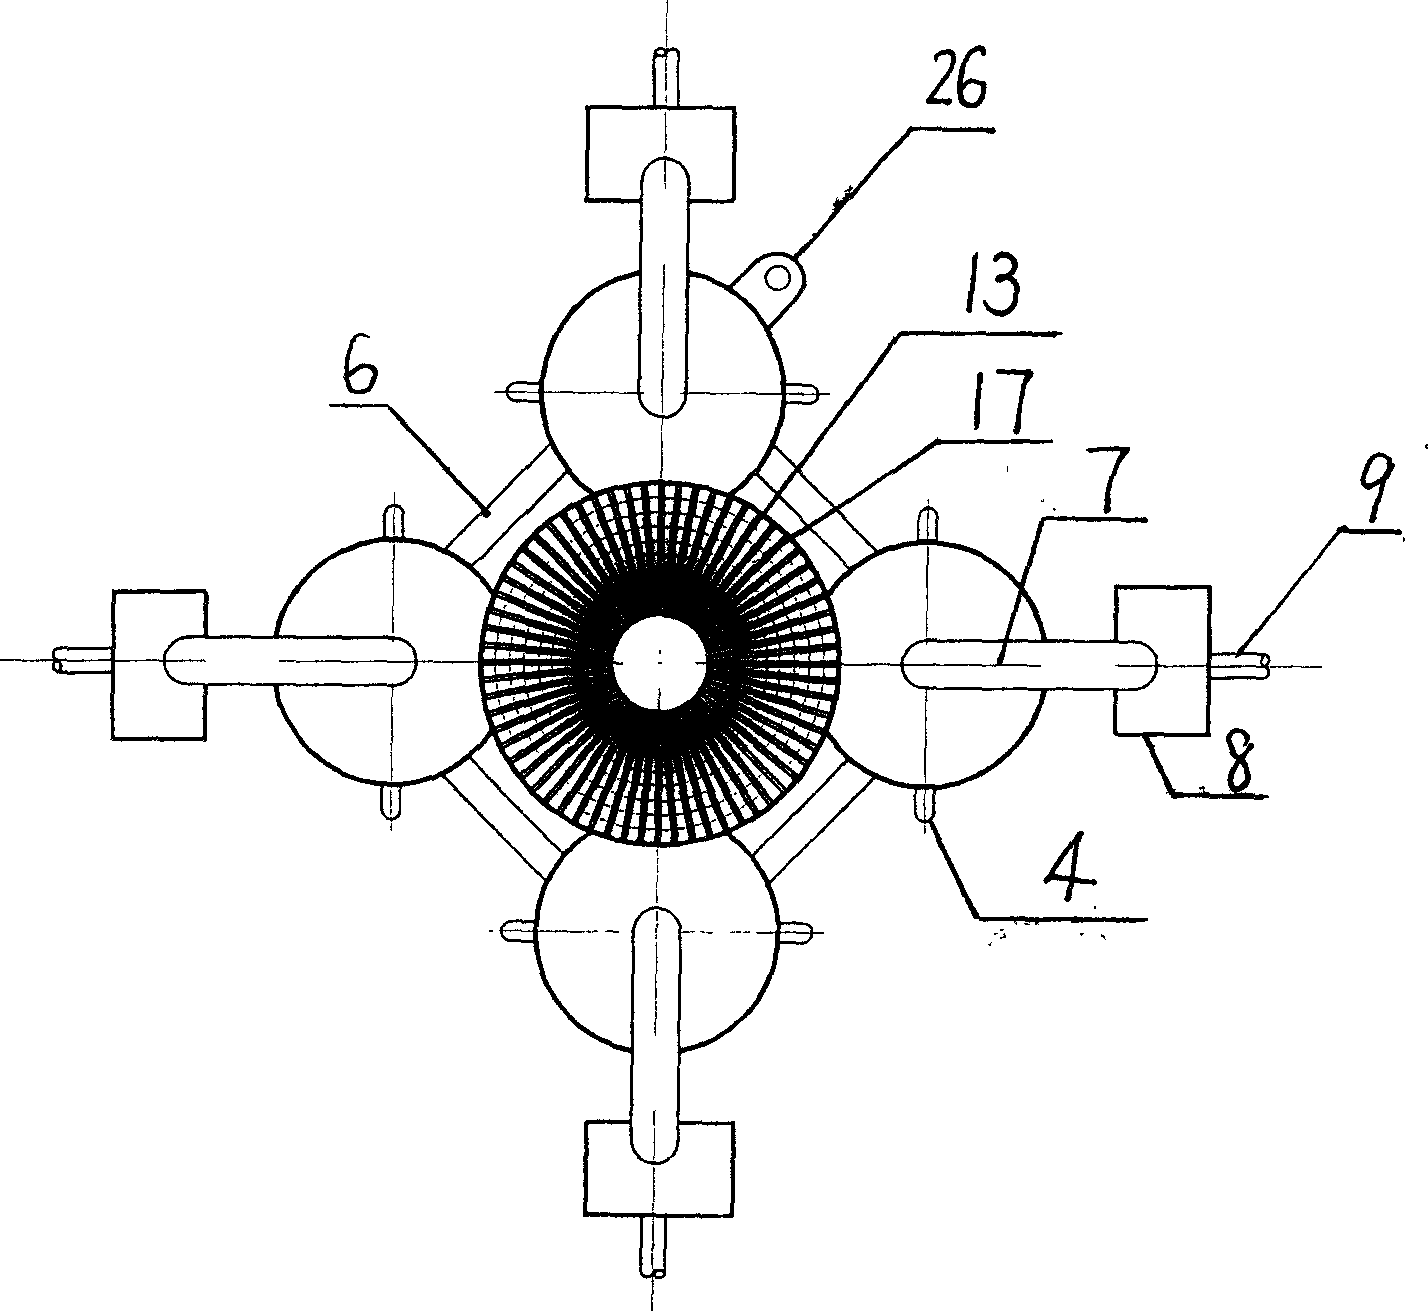 Apparatus and method for treating river and lake water